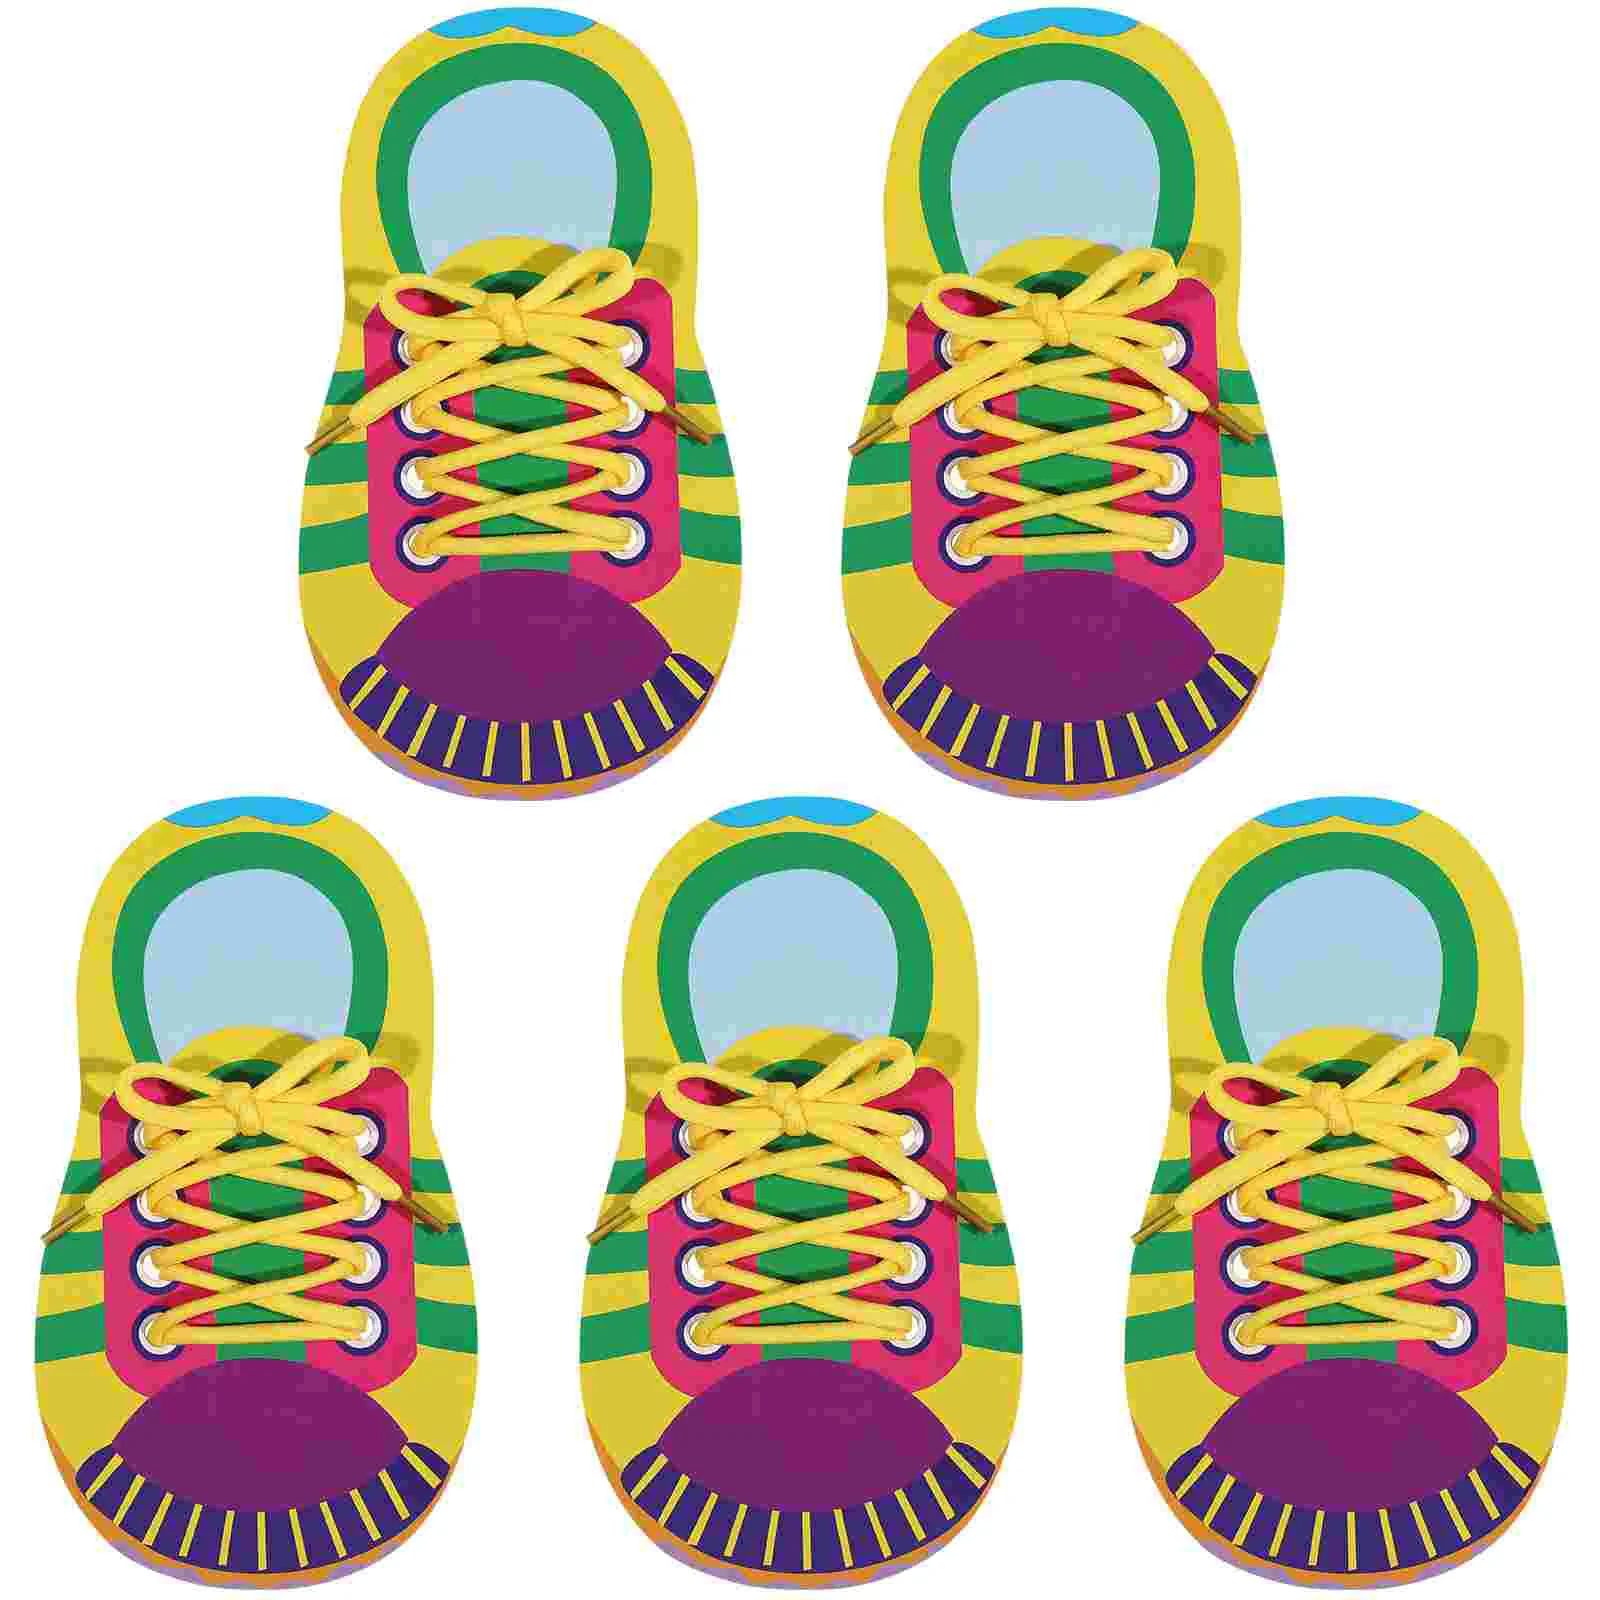 

5 Sets Shoe Trying Practice Toys Fine Motor Skills Shoelace Threading Teaching Game Playthings for Toddlers Kids